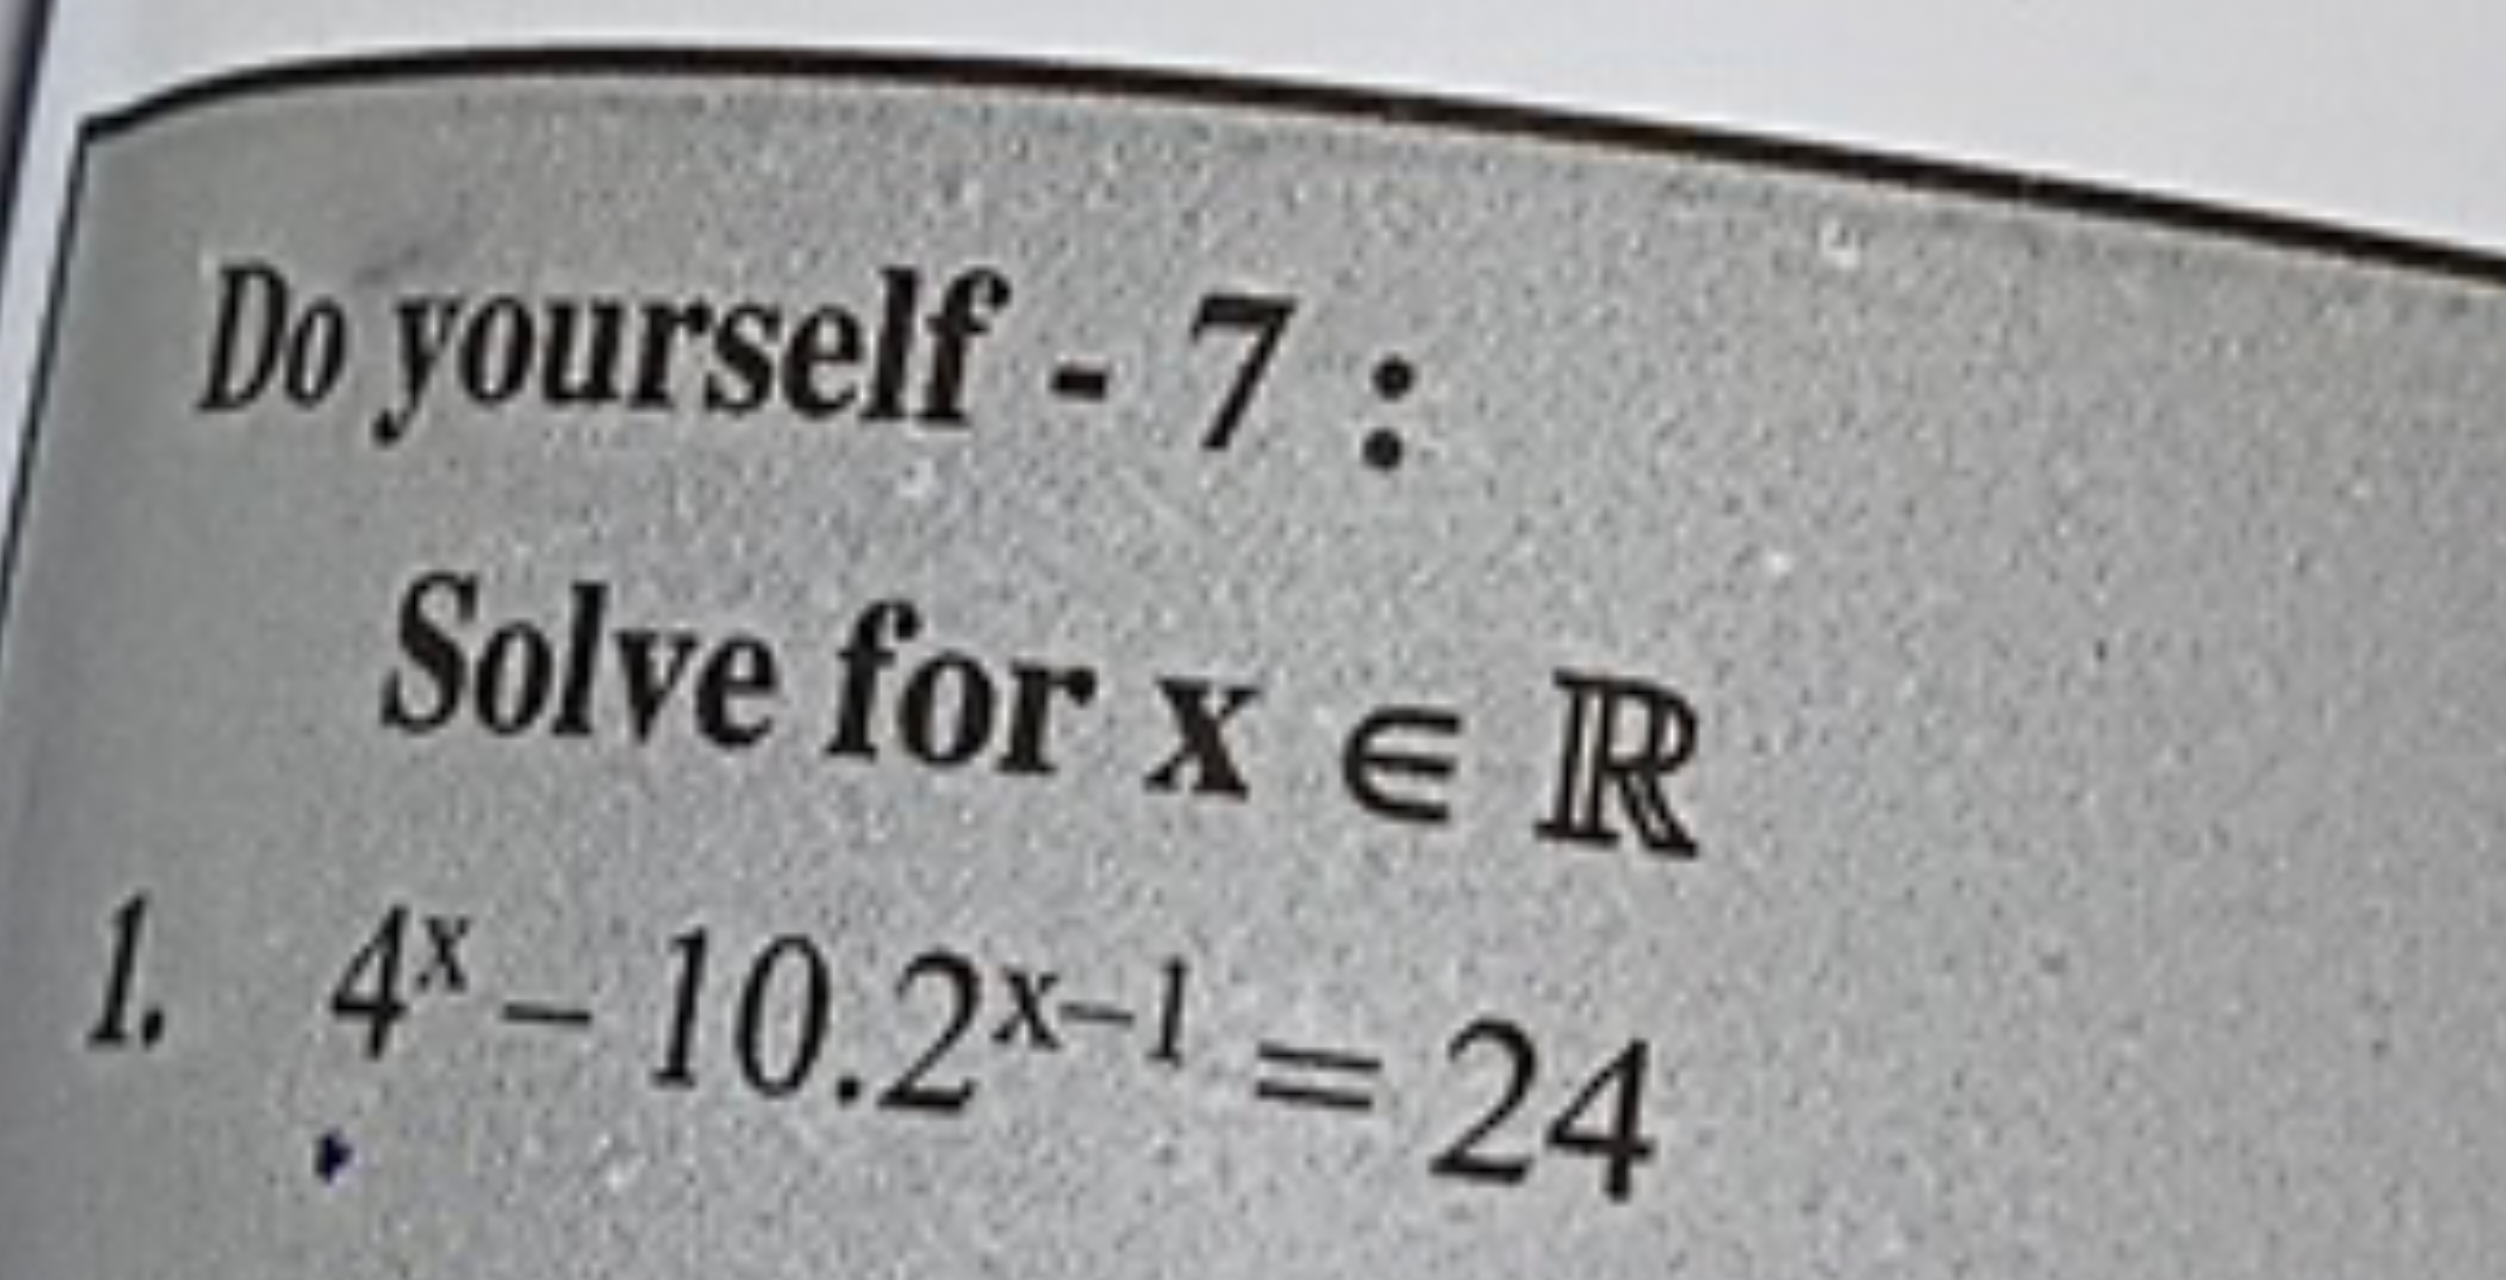 Do yourself -7 :
Solve for x∈R
1. 4x−10.2x−1=24
